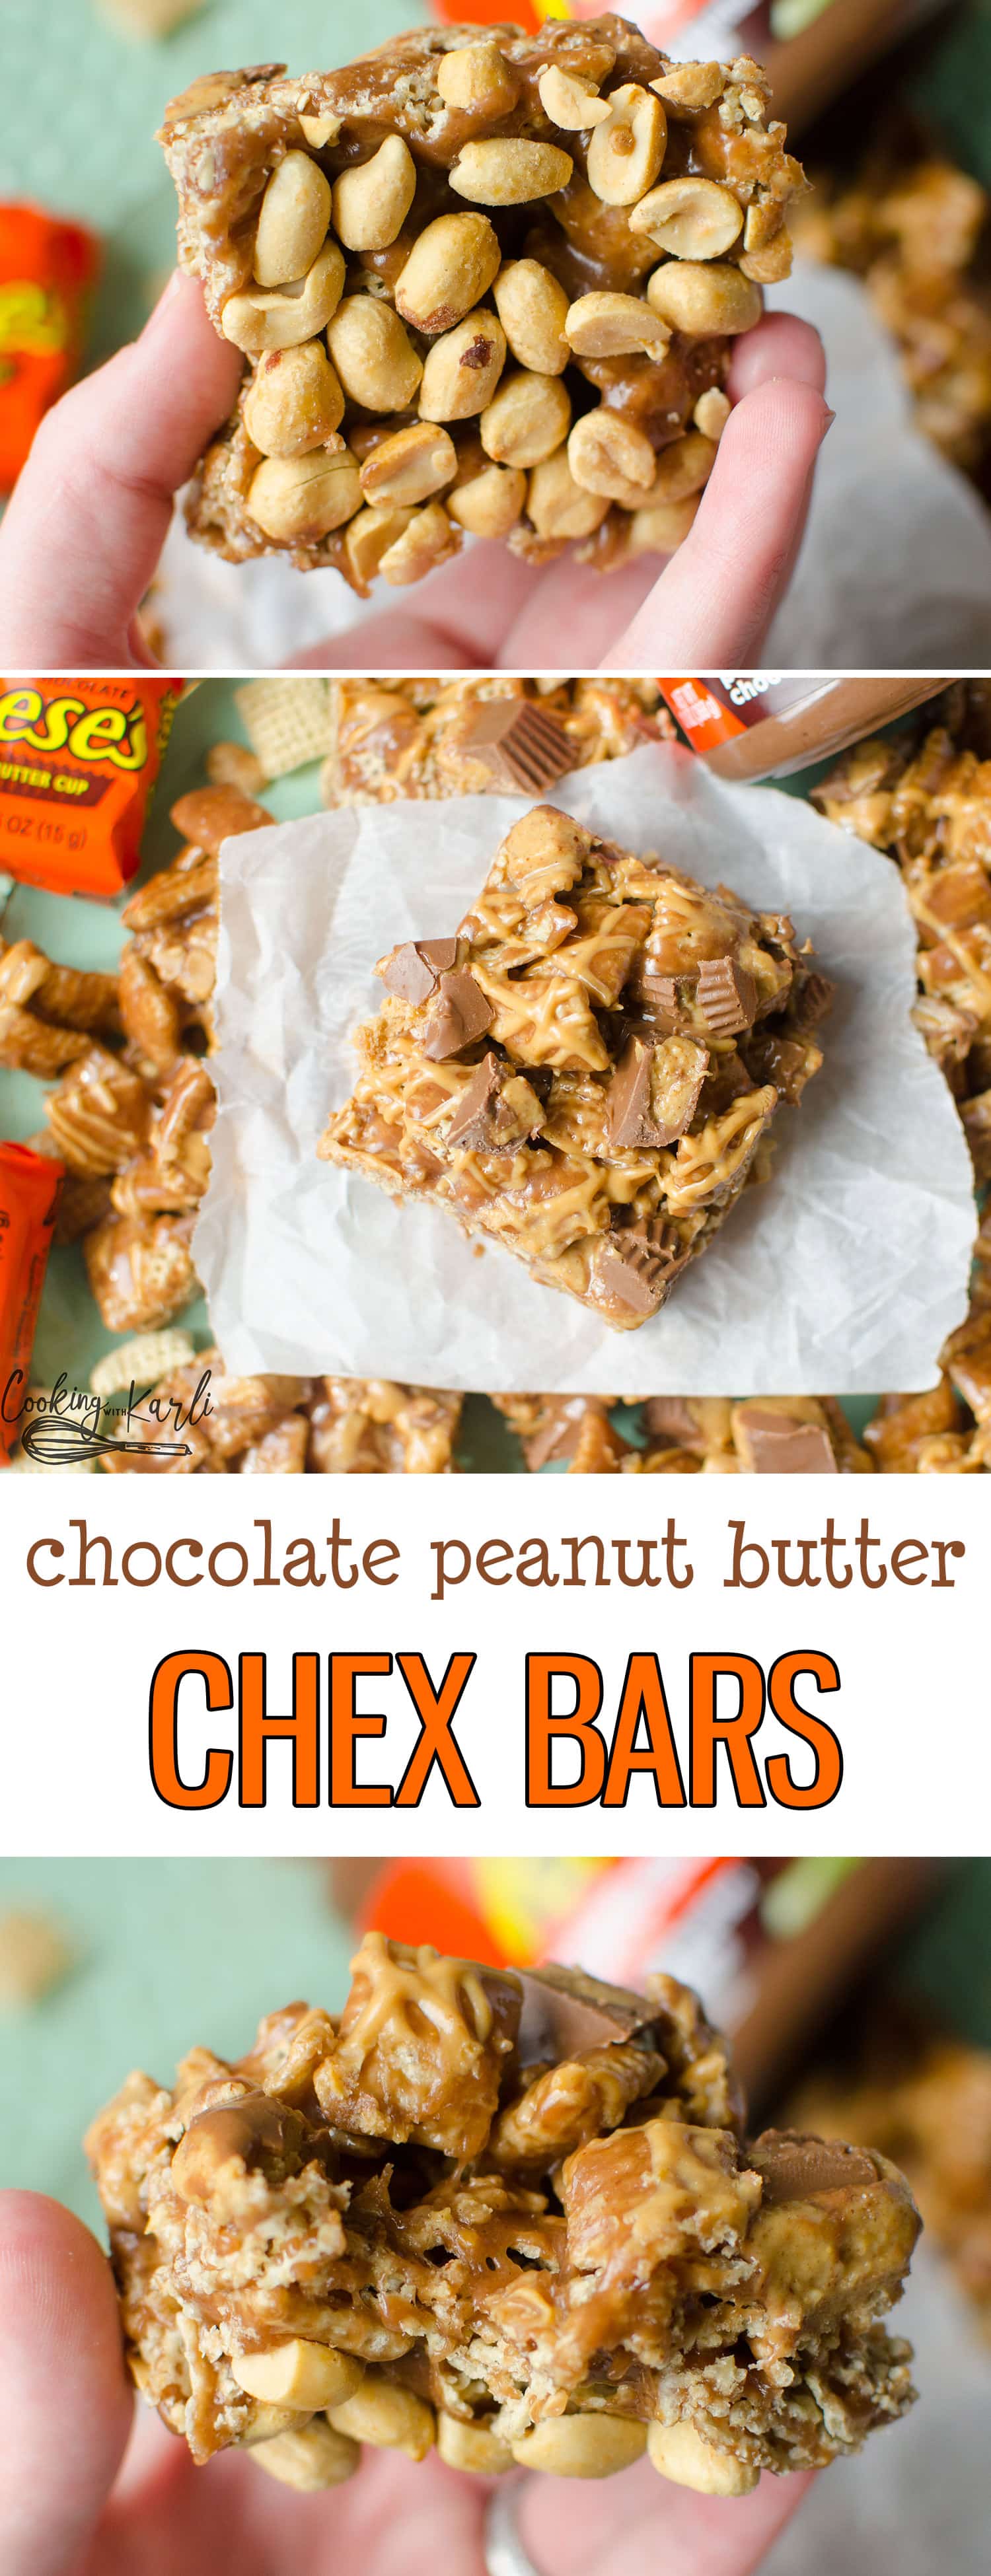 Chocolate Peanut Butter Chex Bars are fully loaded with Reese's Peanut Butter Chocolate Spread, Reese's Peanut Butter Cups, peanut butter drizzle, Chex Cereal and a peanut covered bottom. Any Peanut Butter and Chocolate lover will be in heaven with these! |Cooking with Karli| #chocolate #peanutbutter #chex #cerealbar #dessert #reese's #spreads #dessert #recipe